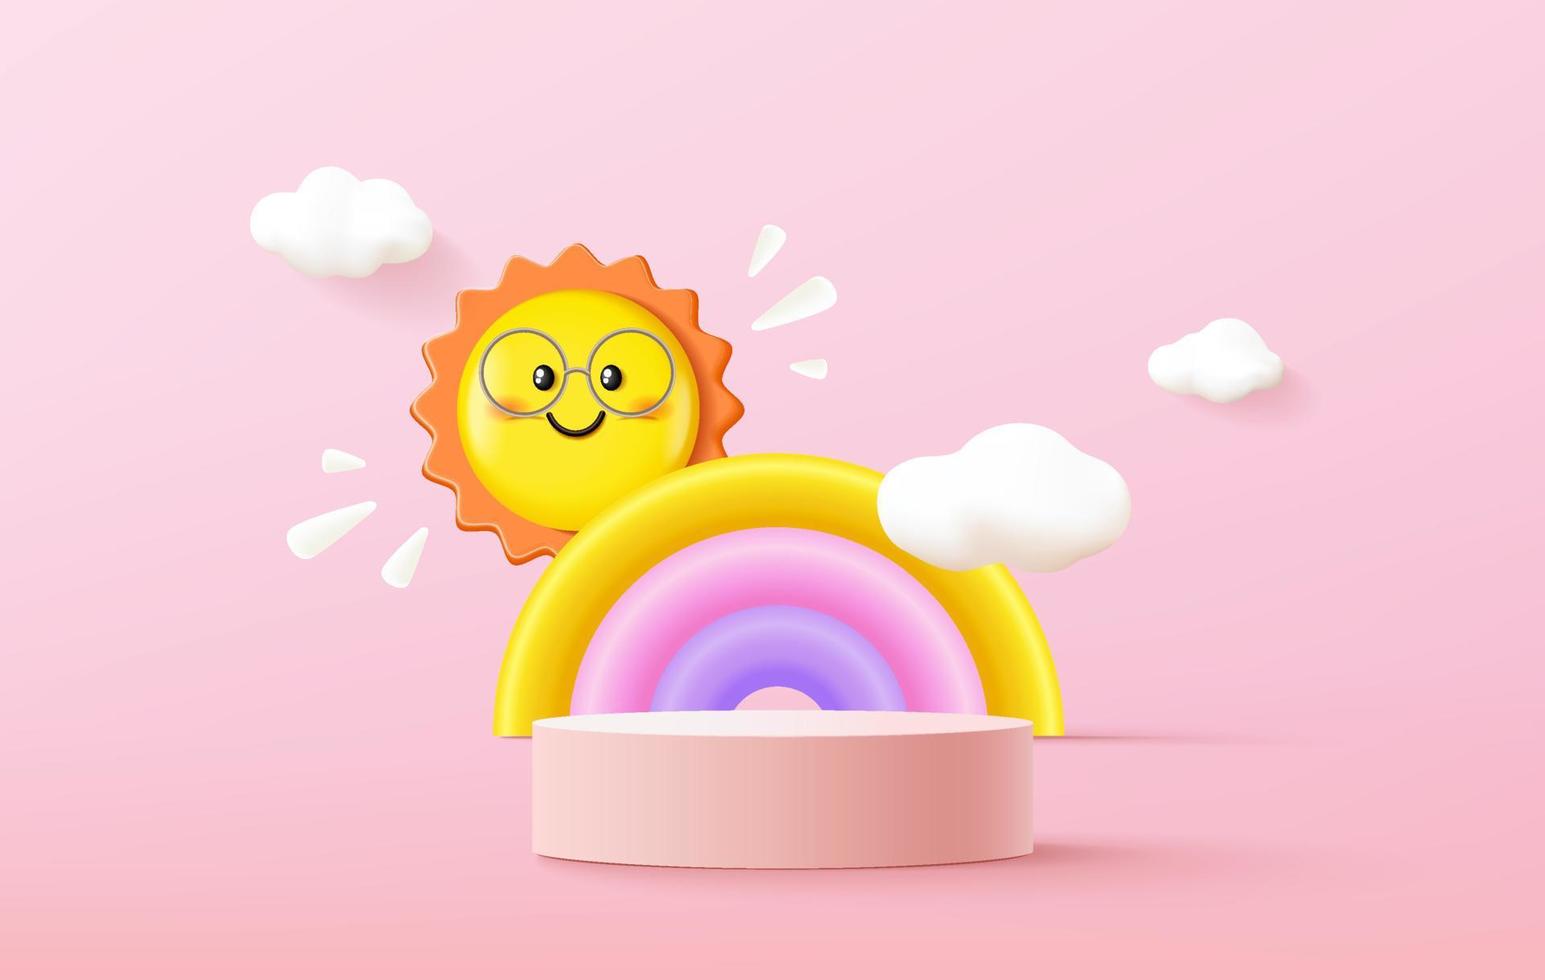 3D rendering. A scene for advertising, Minimalist mockup for podium display or showcase. Vector illustrations with cute decorated. Nursery baby illustrations.